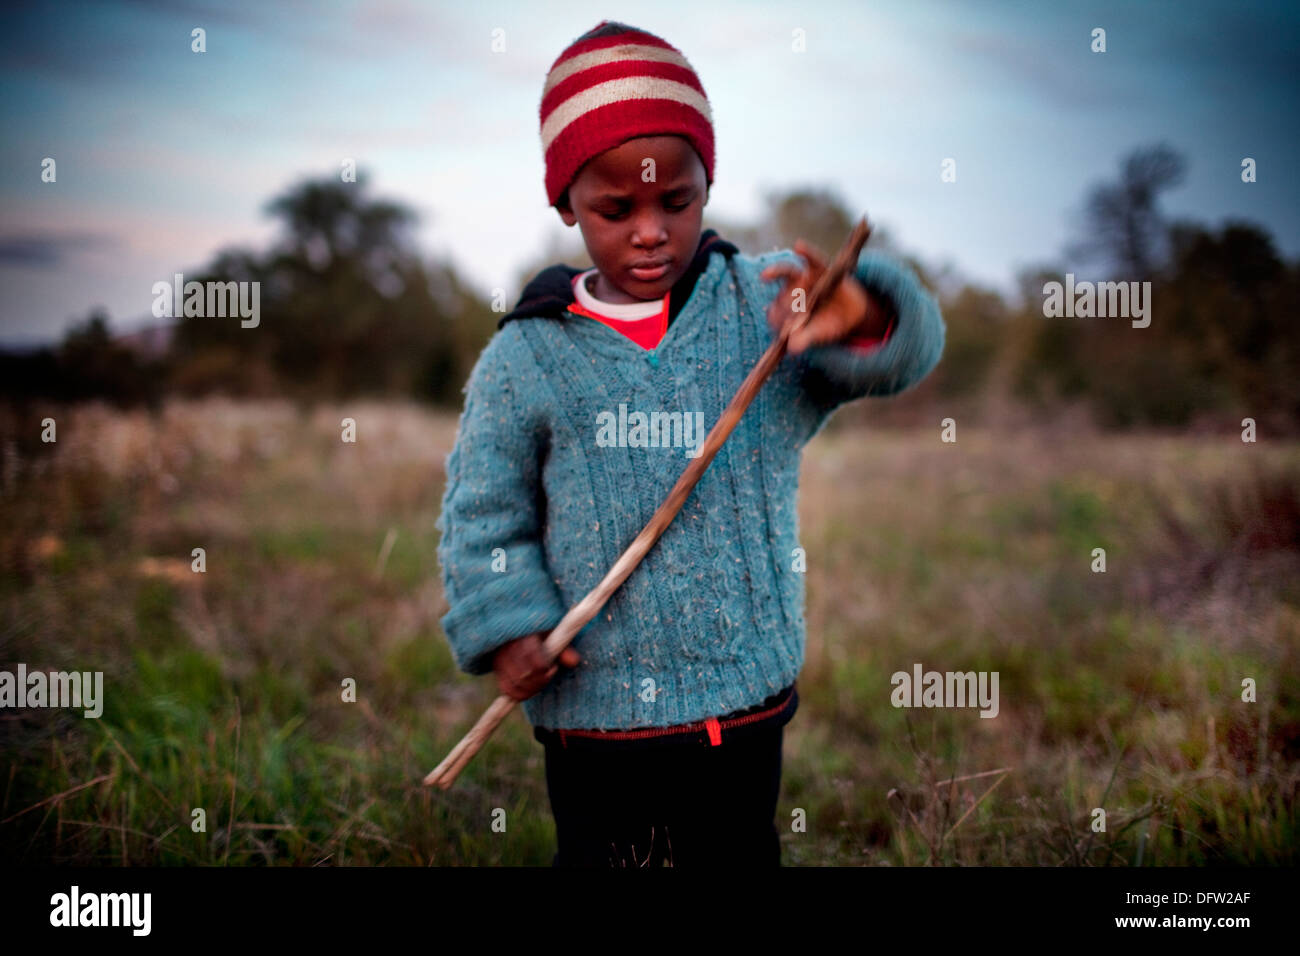 Aya plays with a stick in a field on a farm in Riebeek Kasteel Stock Photo